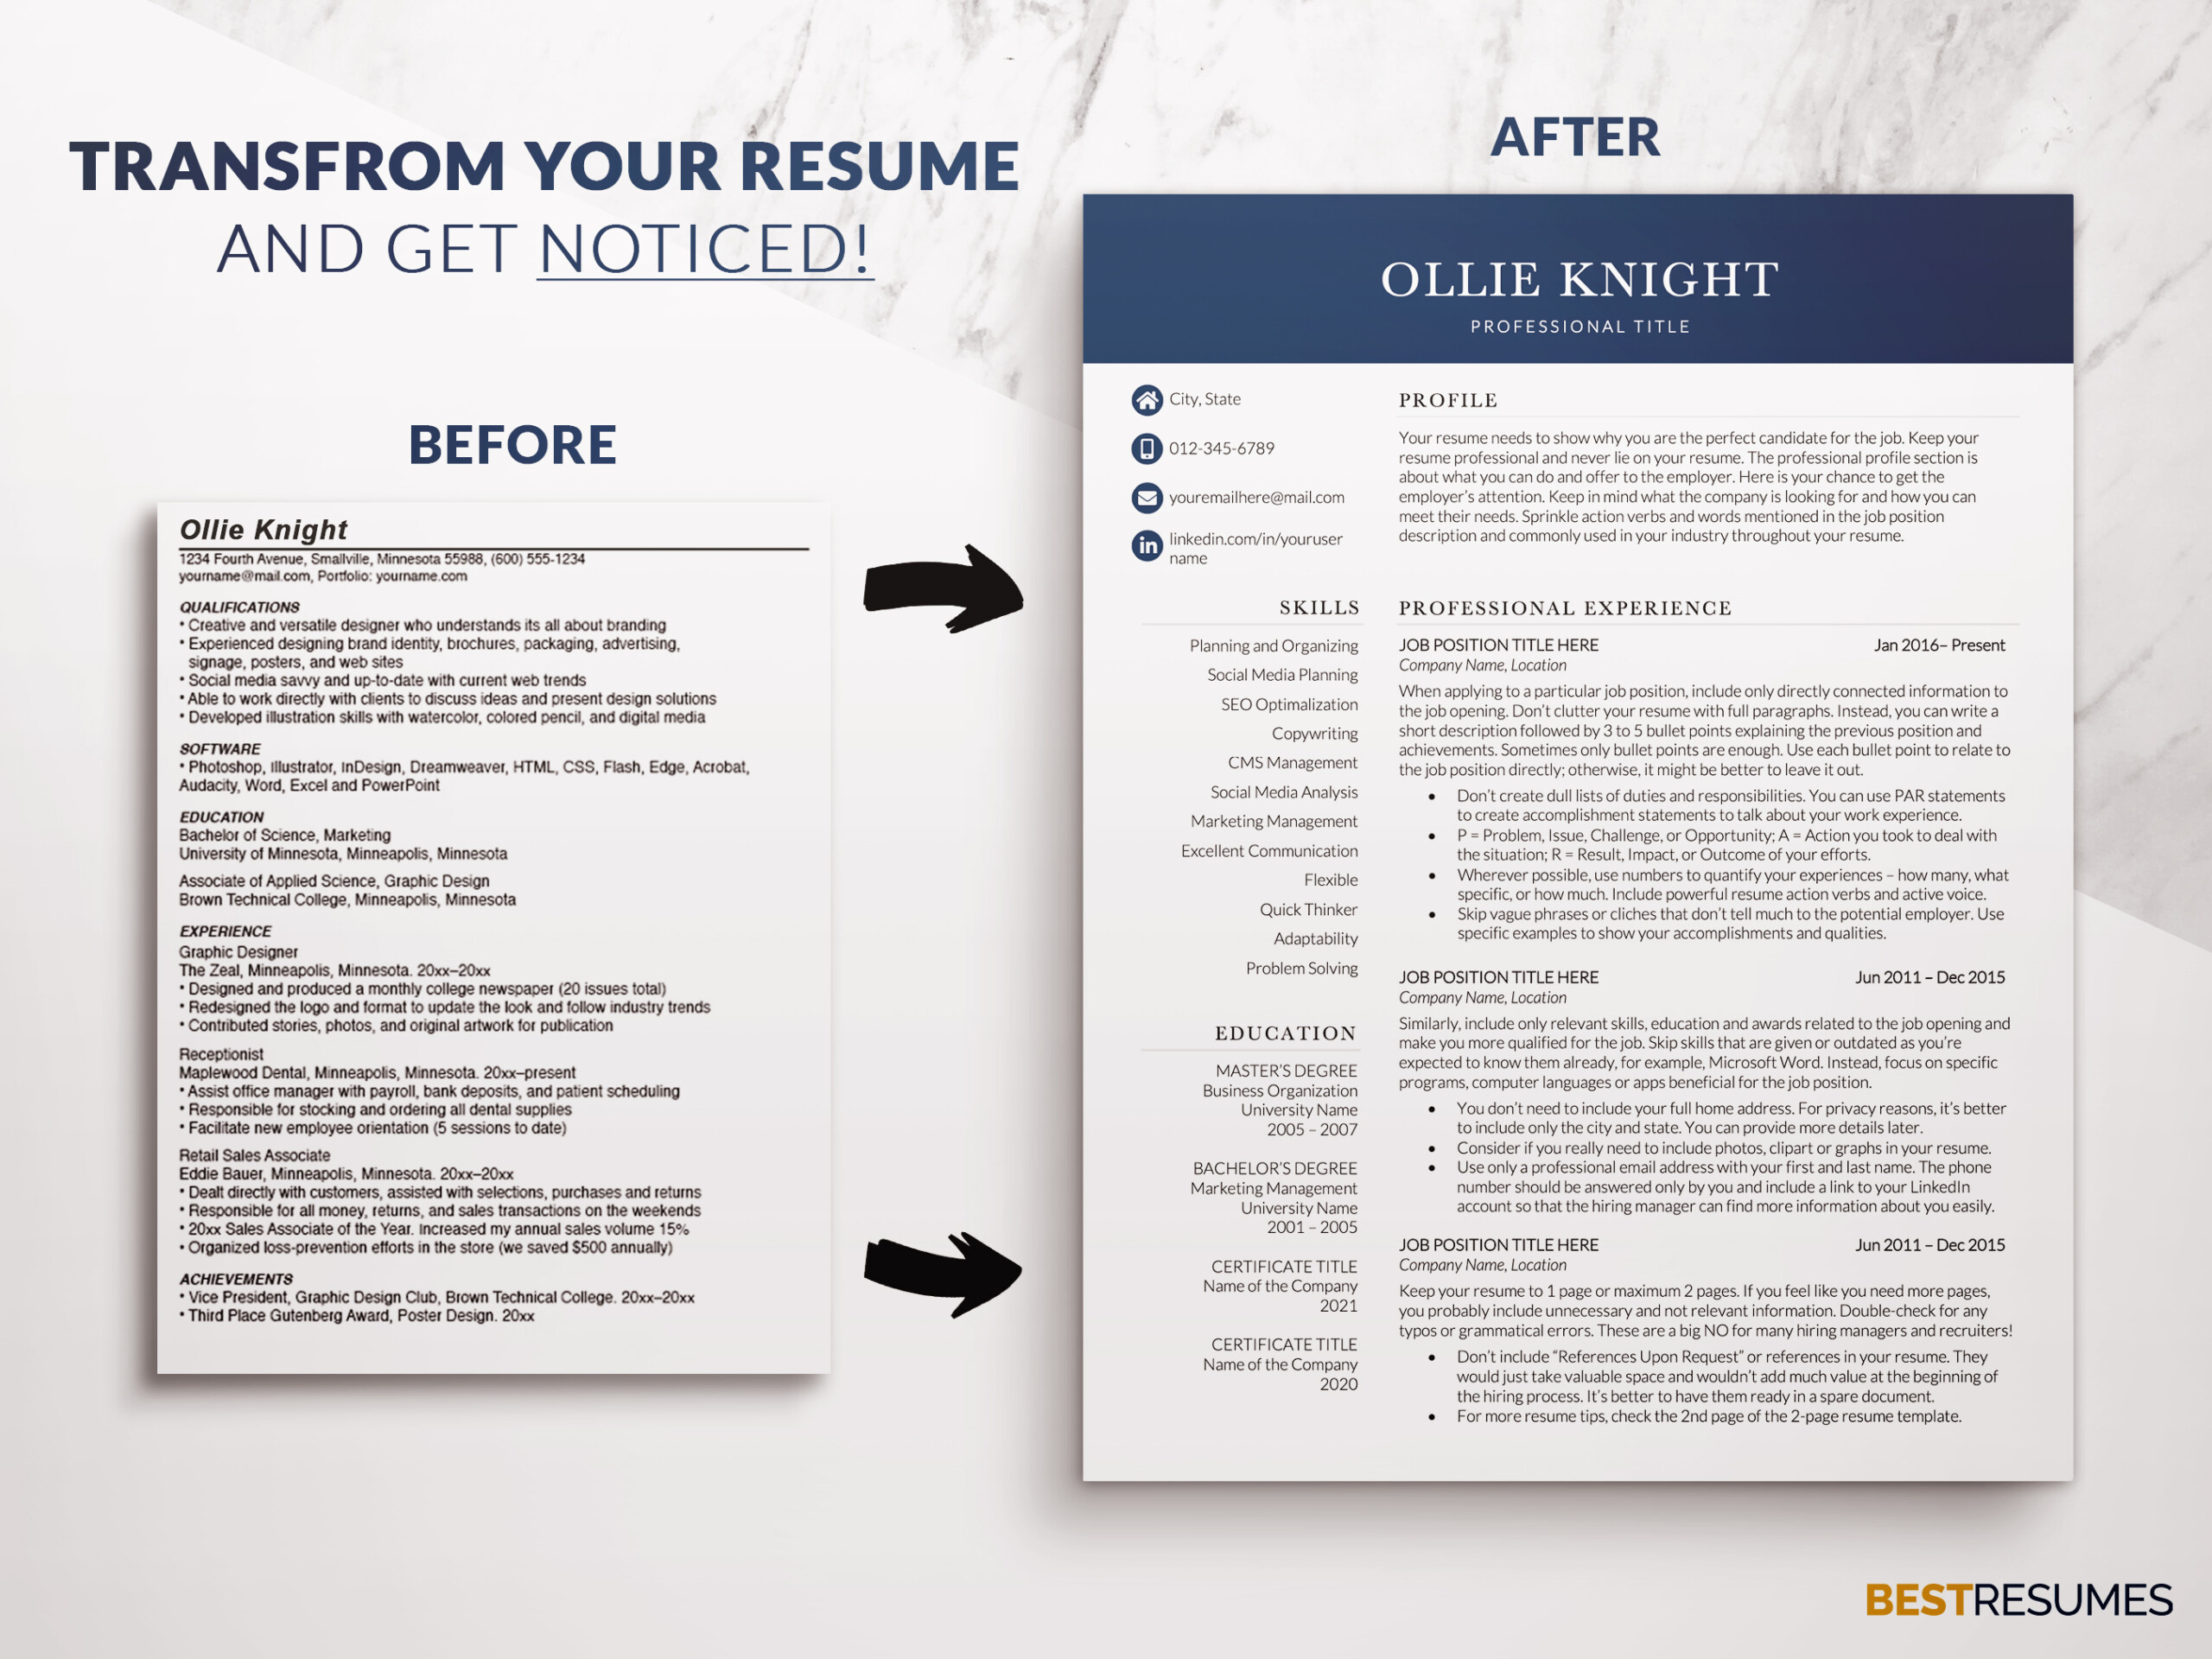 Professional-Executive-Resume-Template-Resume-Transformation-Ollie-Knight